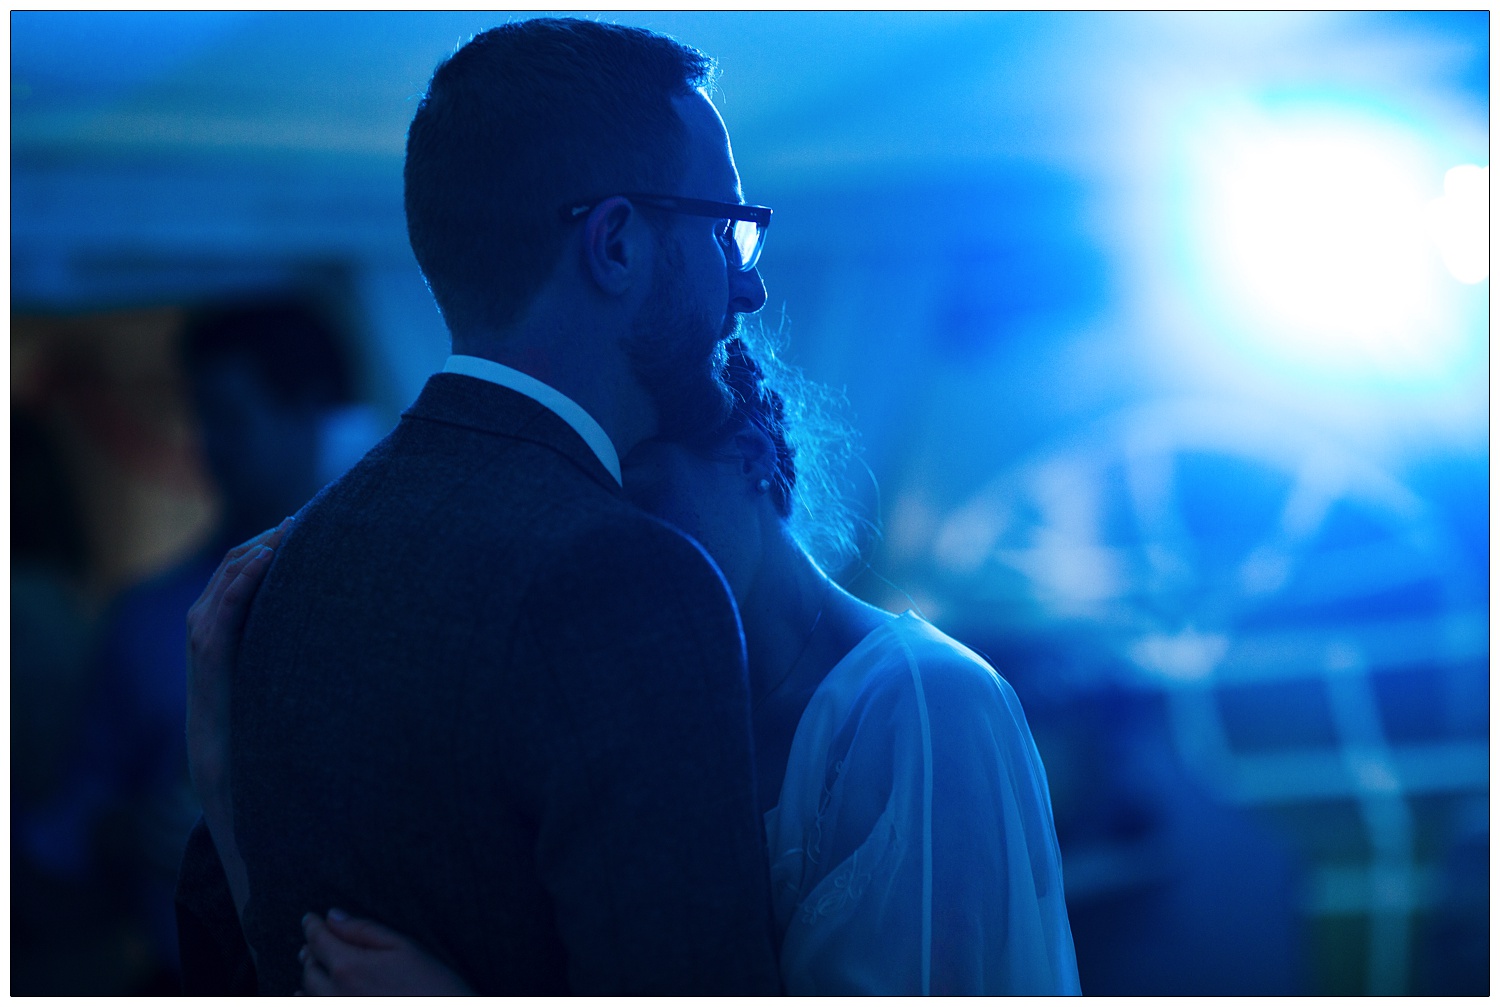 Bride and groom having their first dance in blue light.